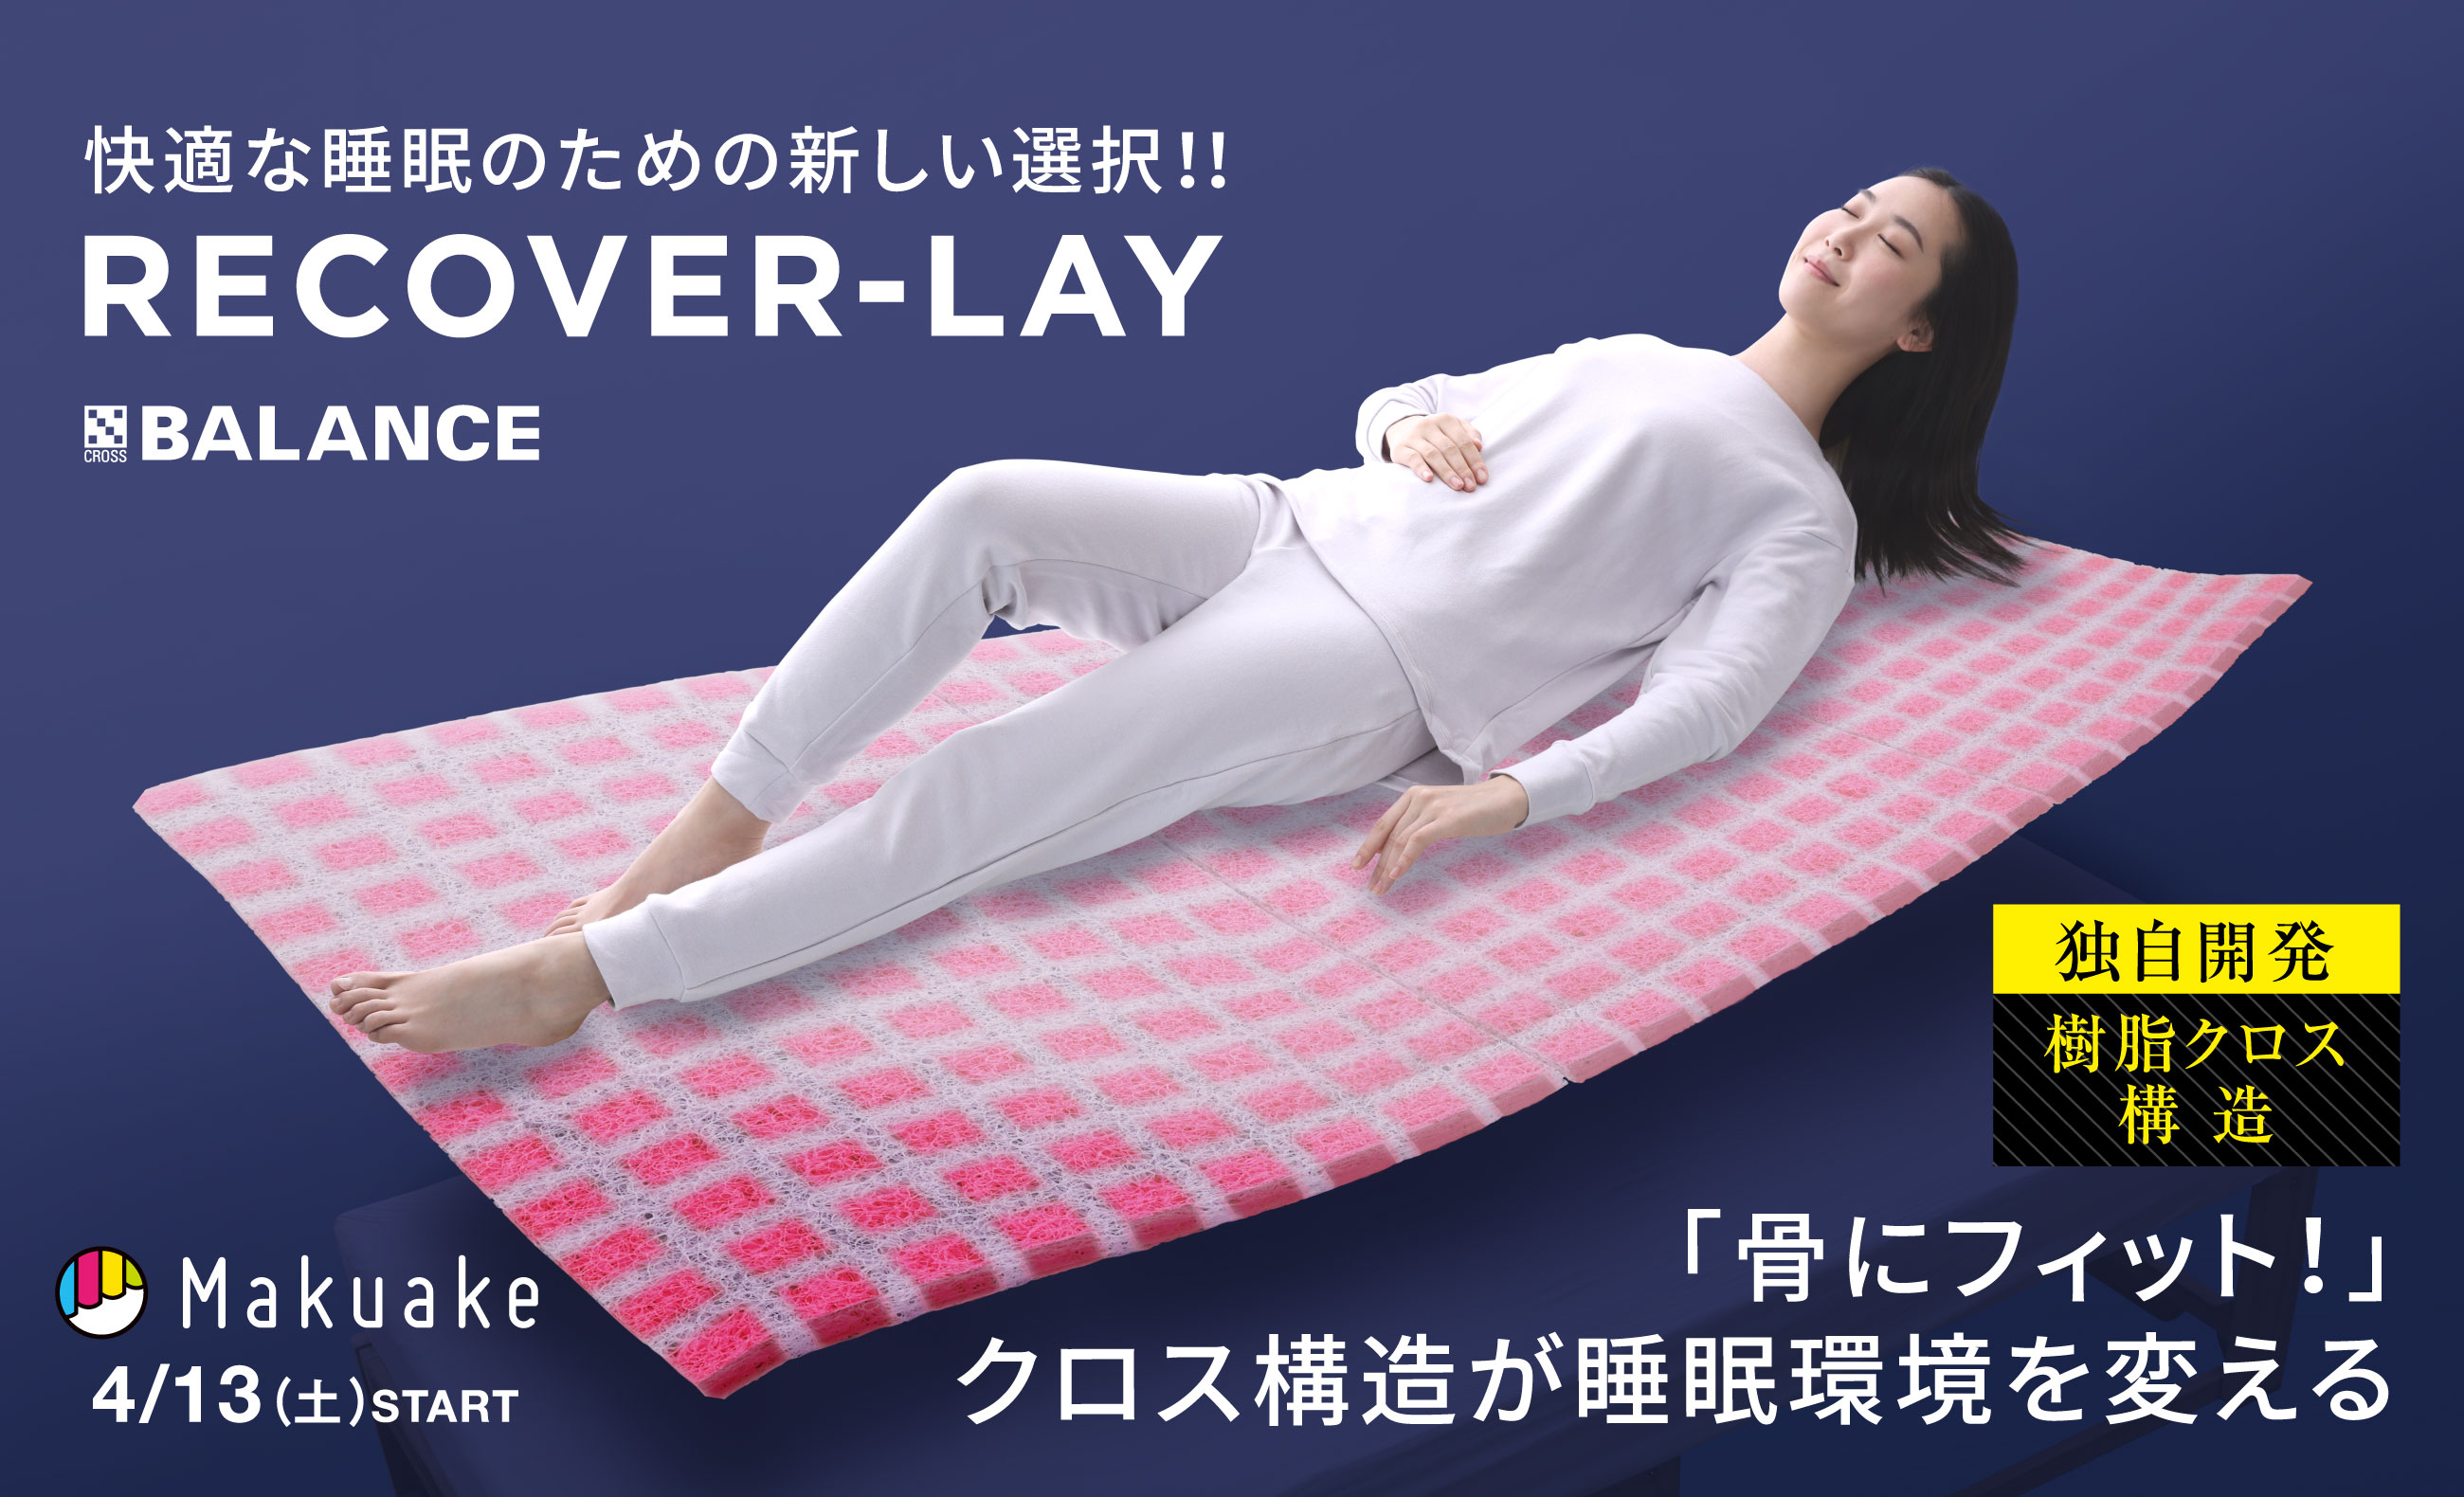 RECOVER-LAY